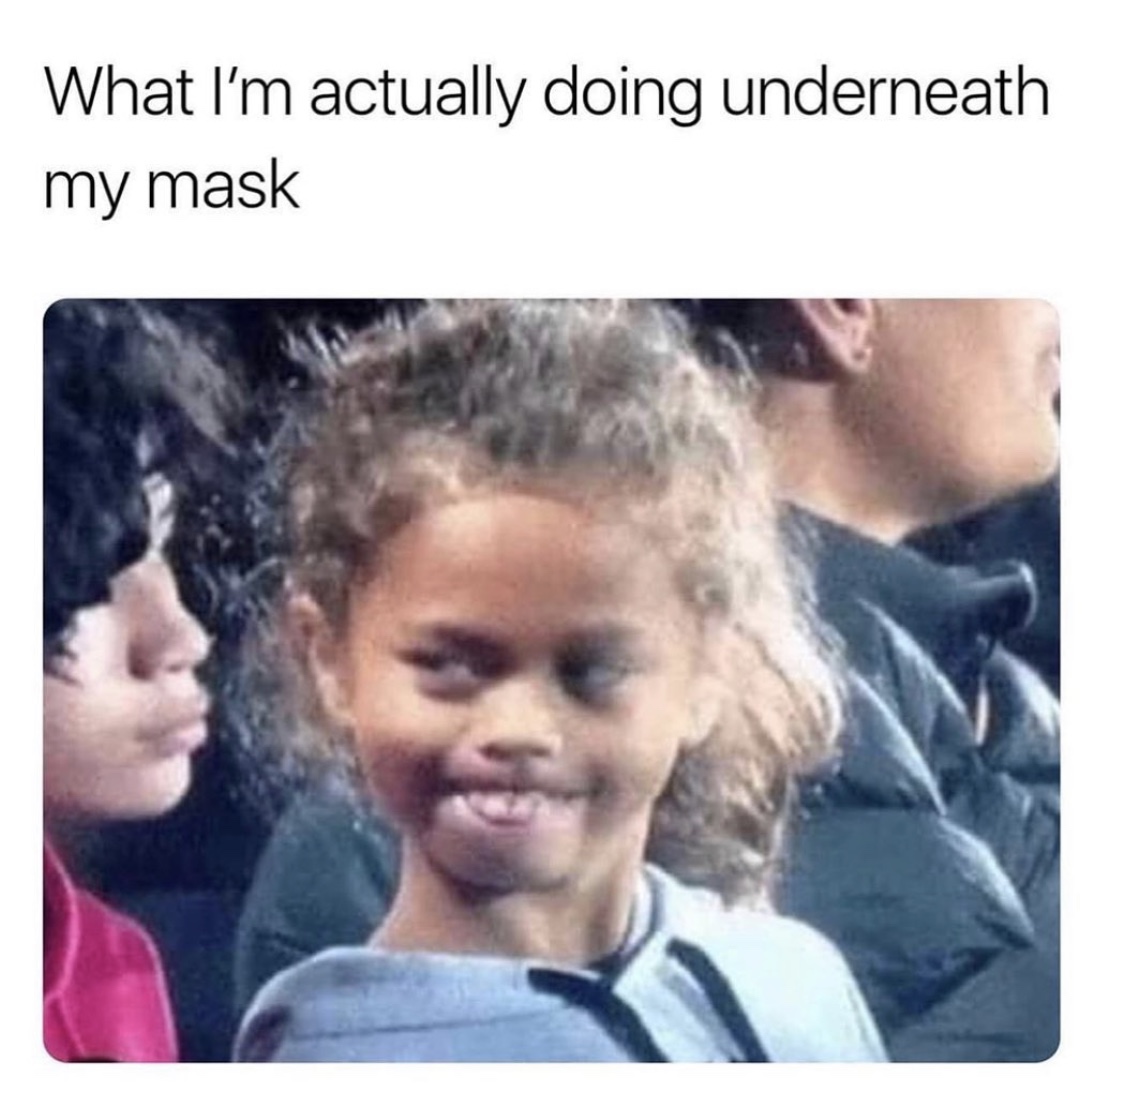 me trying to flirt meme - What I'm actually doing underneath my mask